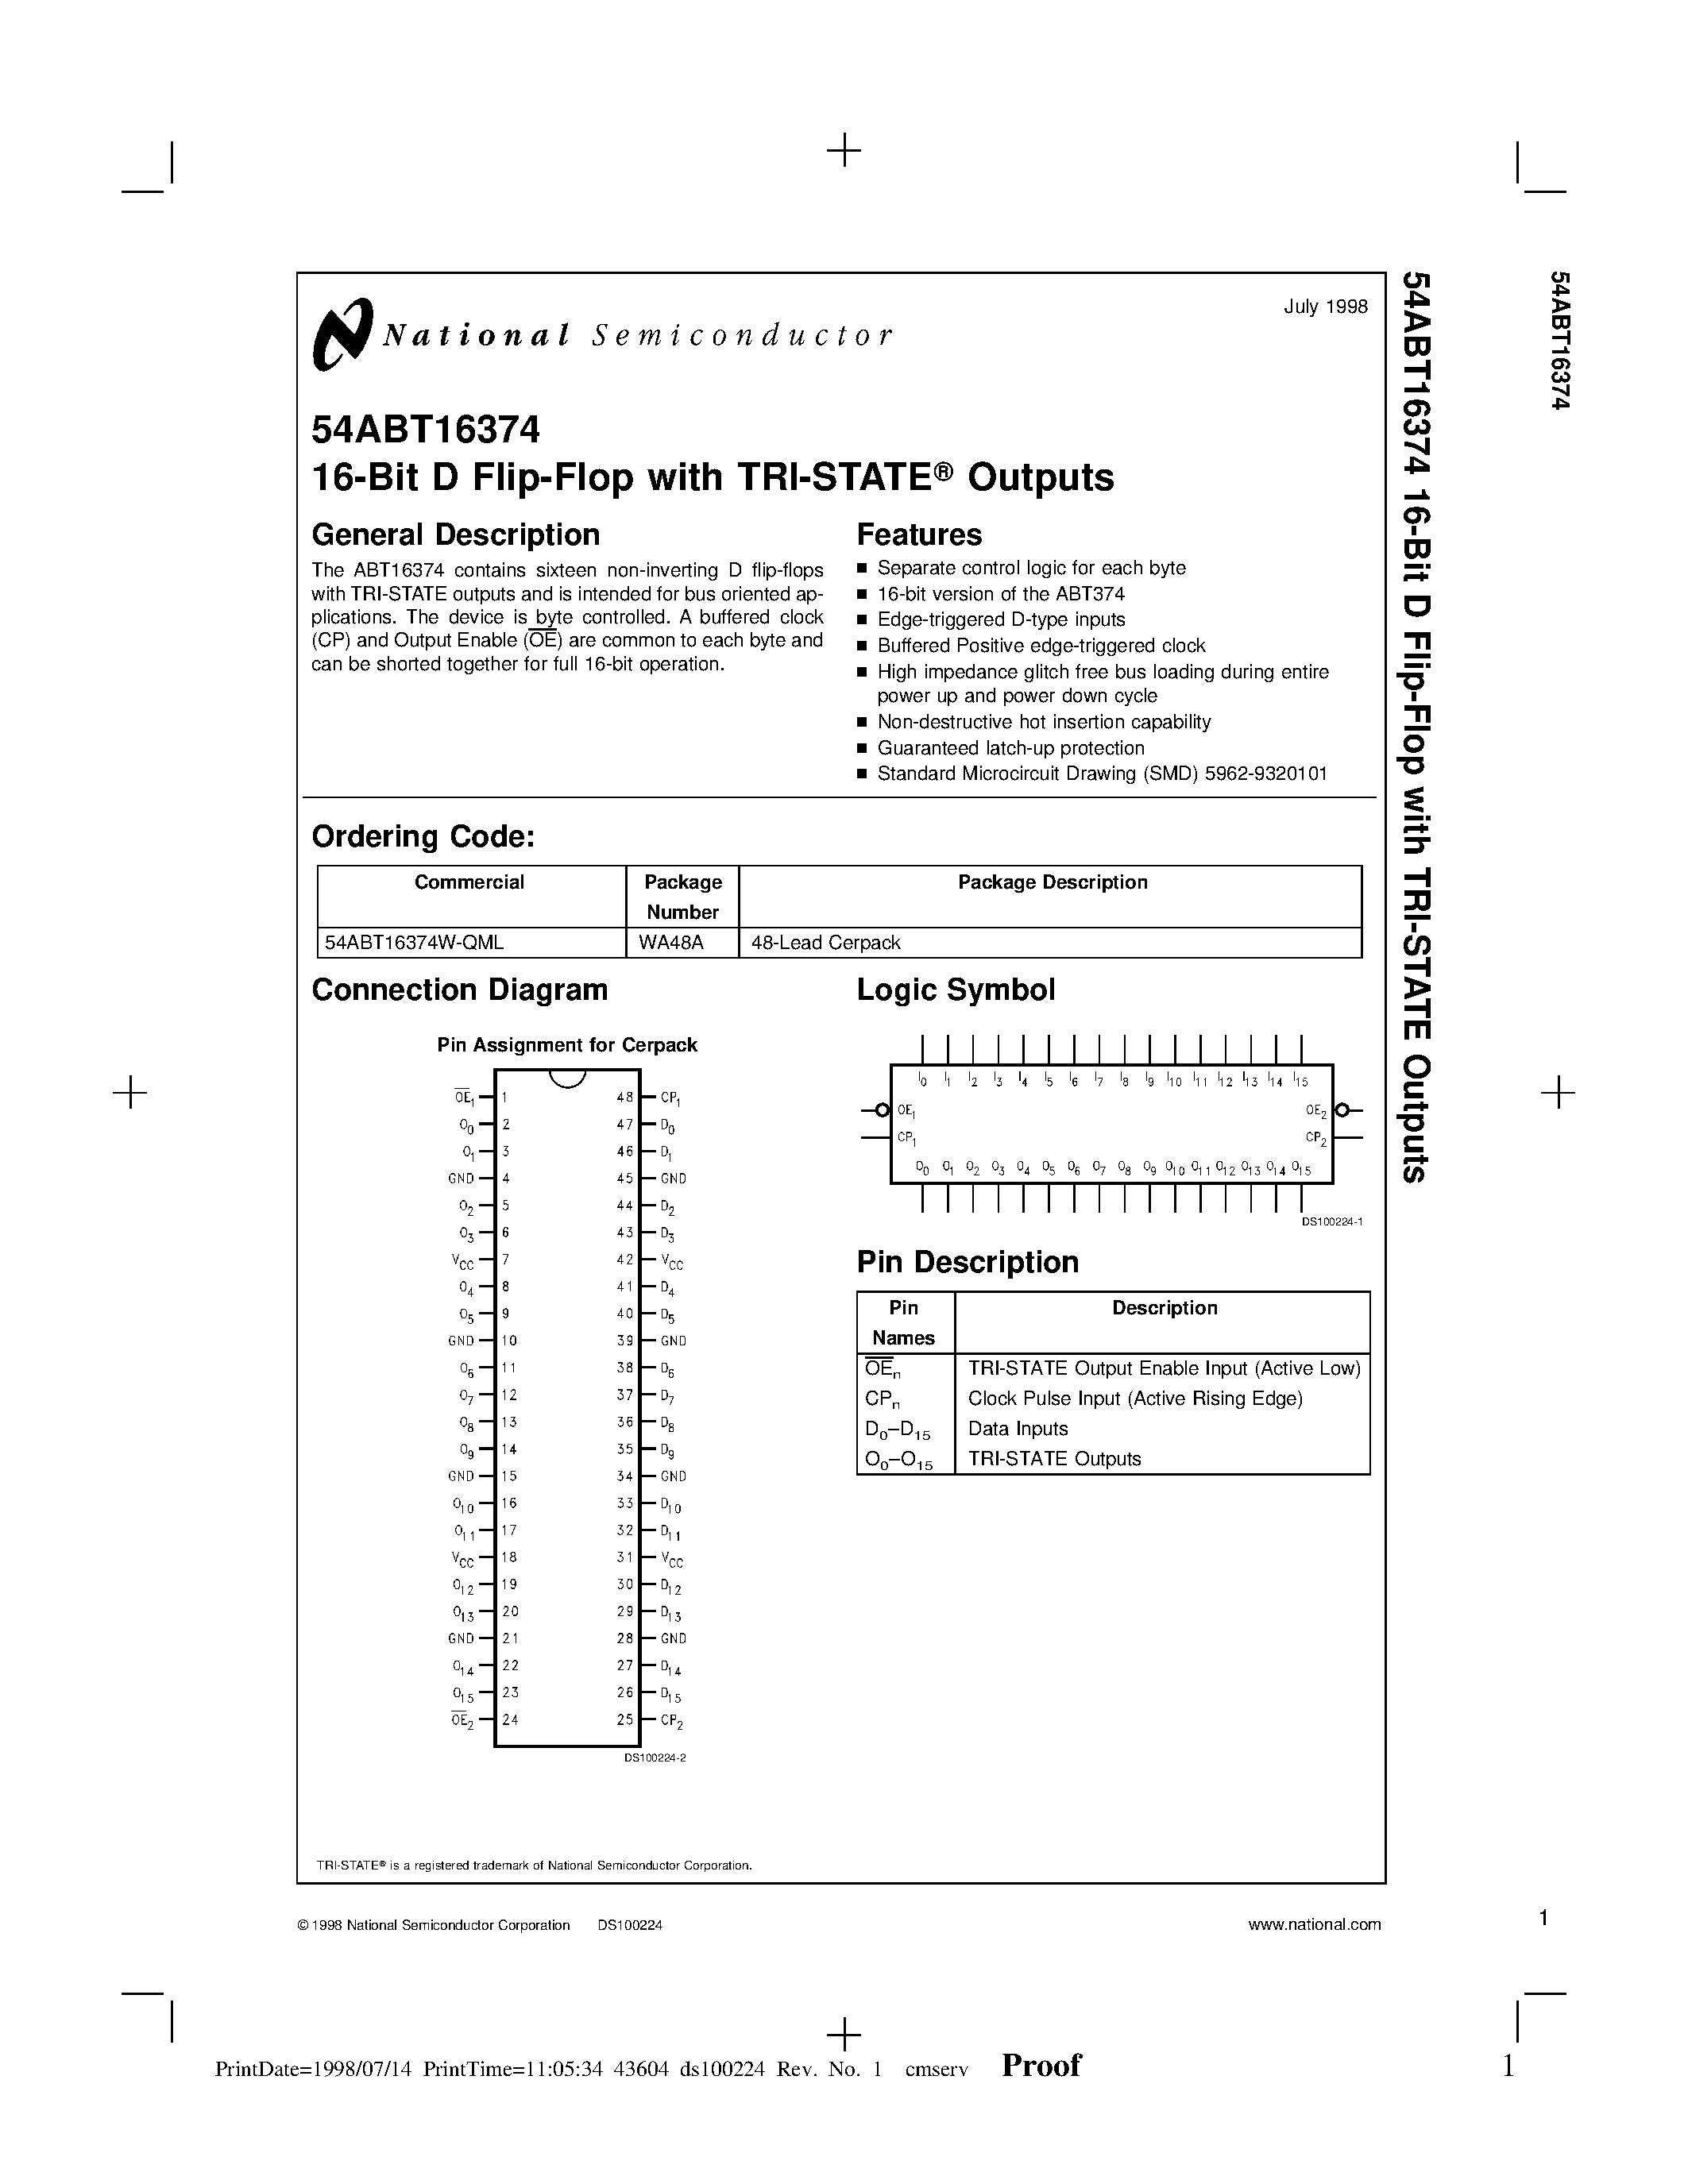 Datasheet 54ABT16374 - 16-Bit D Flip-Flop with TRI-STATE Outputs page 1